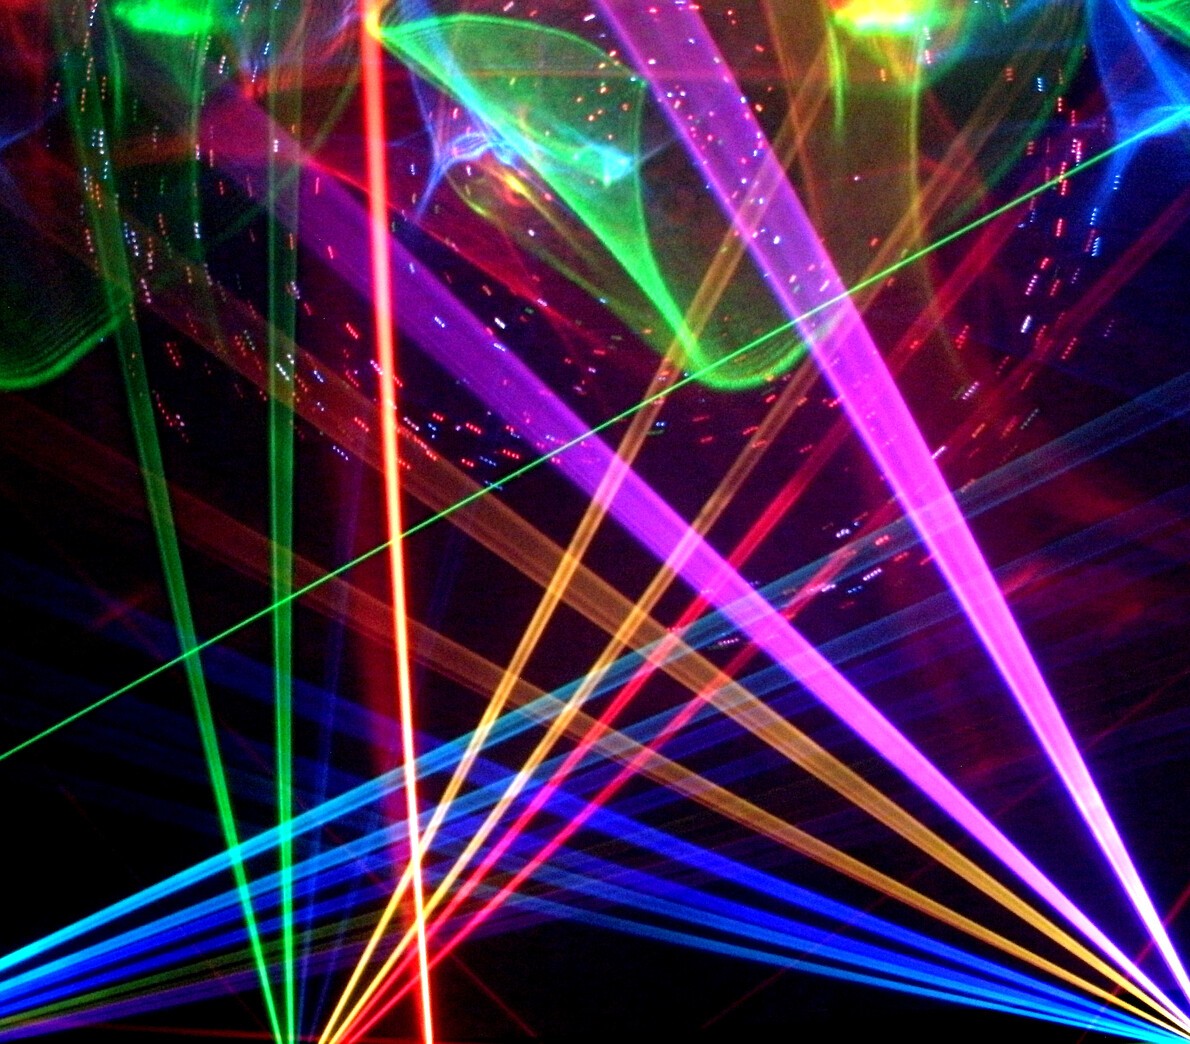 laser image with intersecting lines of purple, red, blue